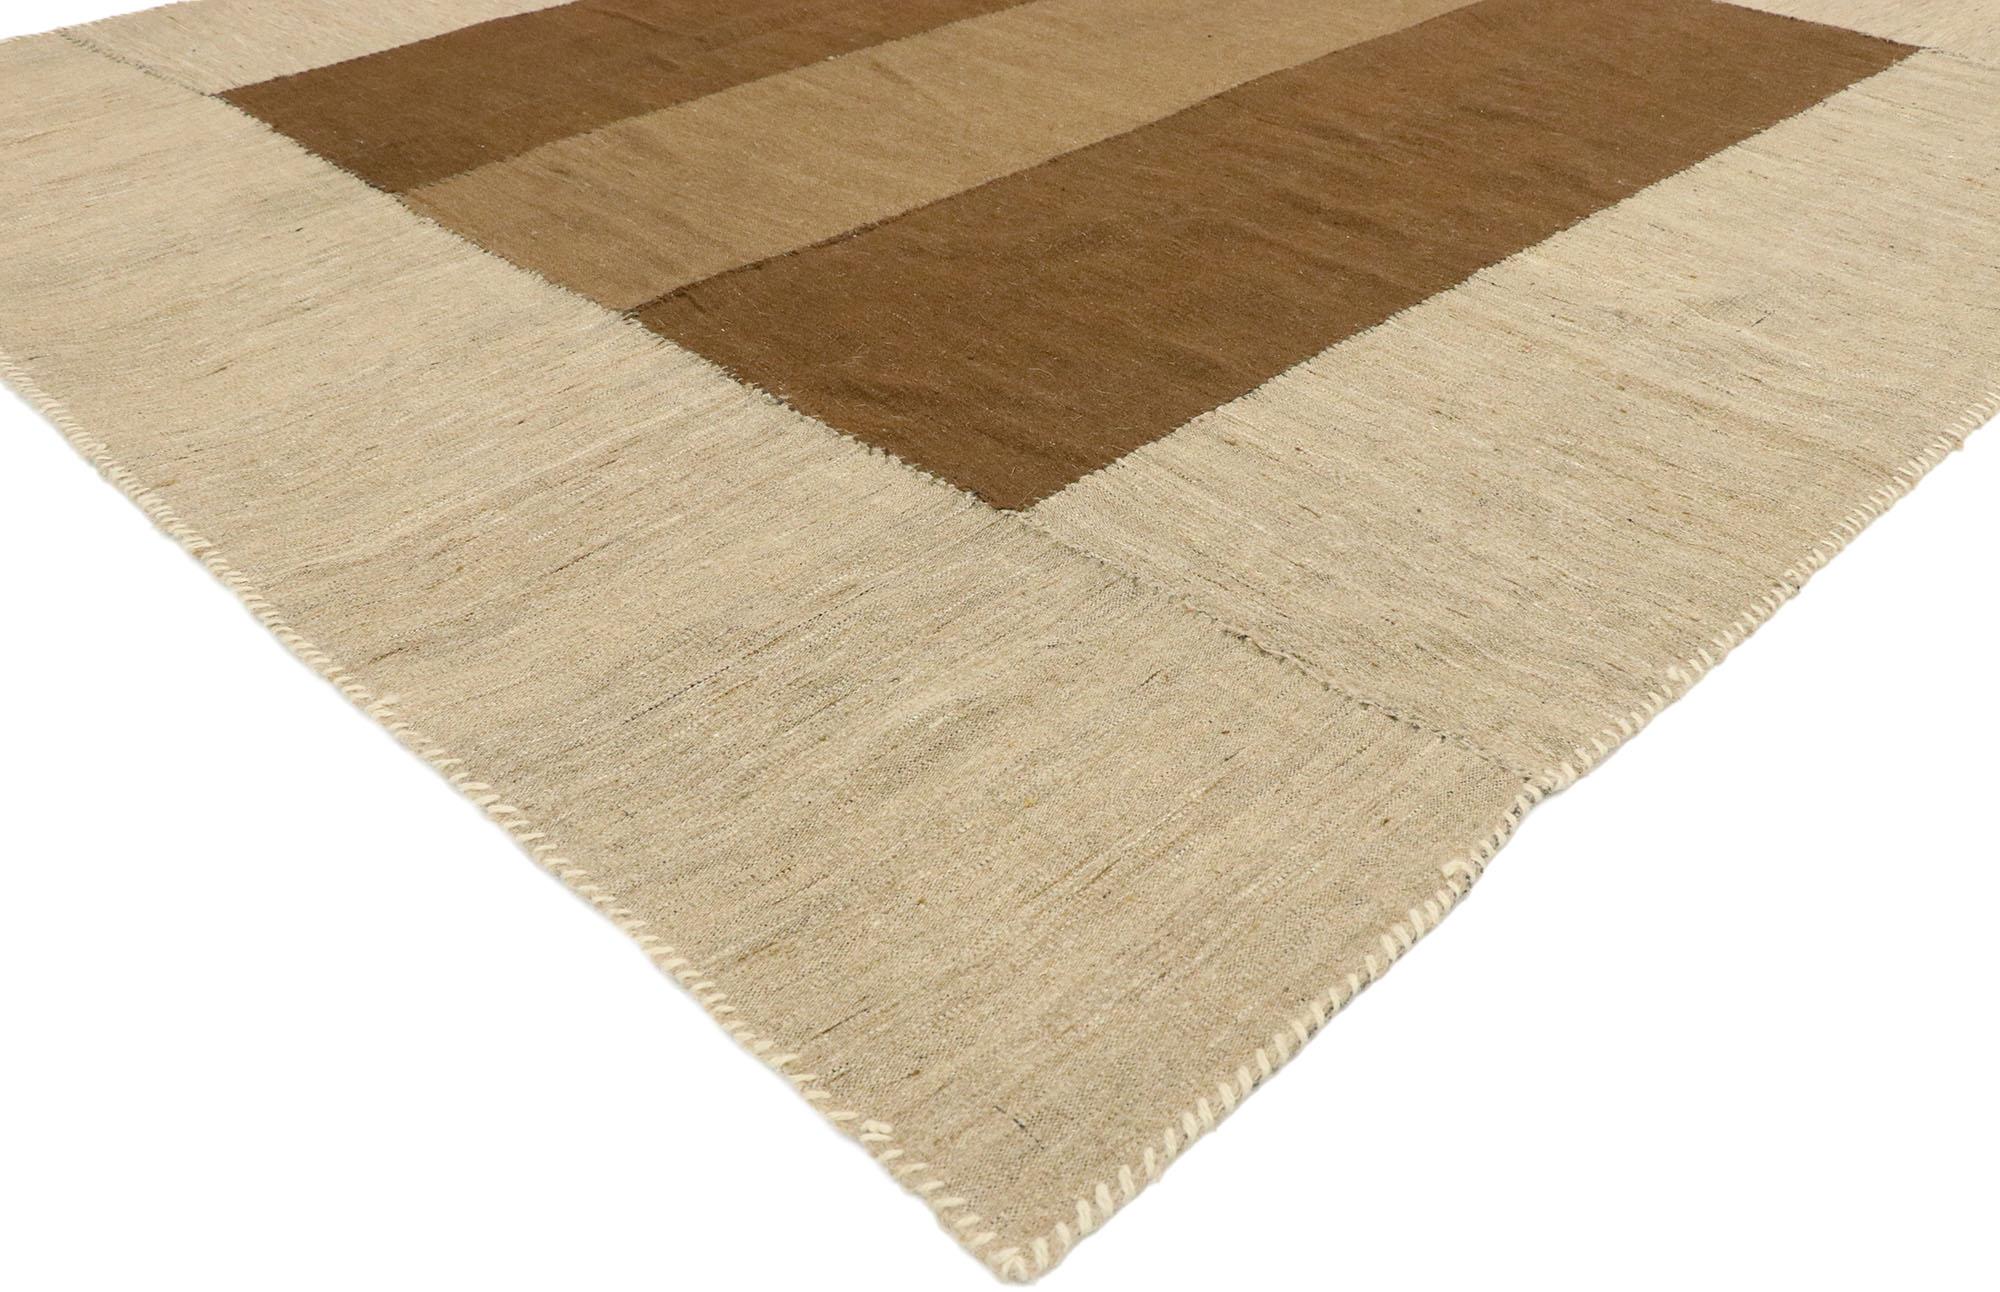 76386, vintage Persian Kilim Area rug with Mid-Century Modern style, flat-weave Kilim rug. Balancing a classic stripe design with earth-tone colors and Mid-Century Modern style, this handwoven wool vintage Persian Kilim area rug is a captivating